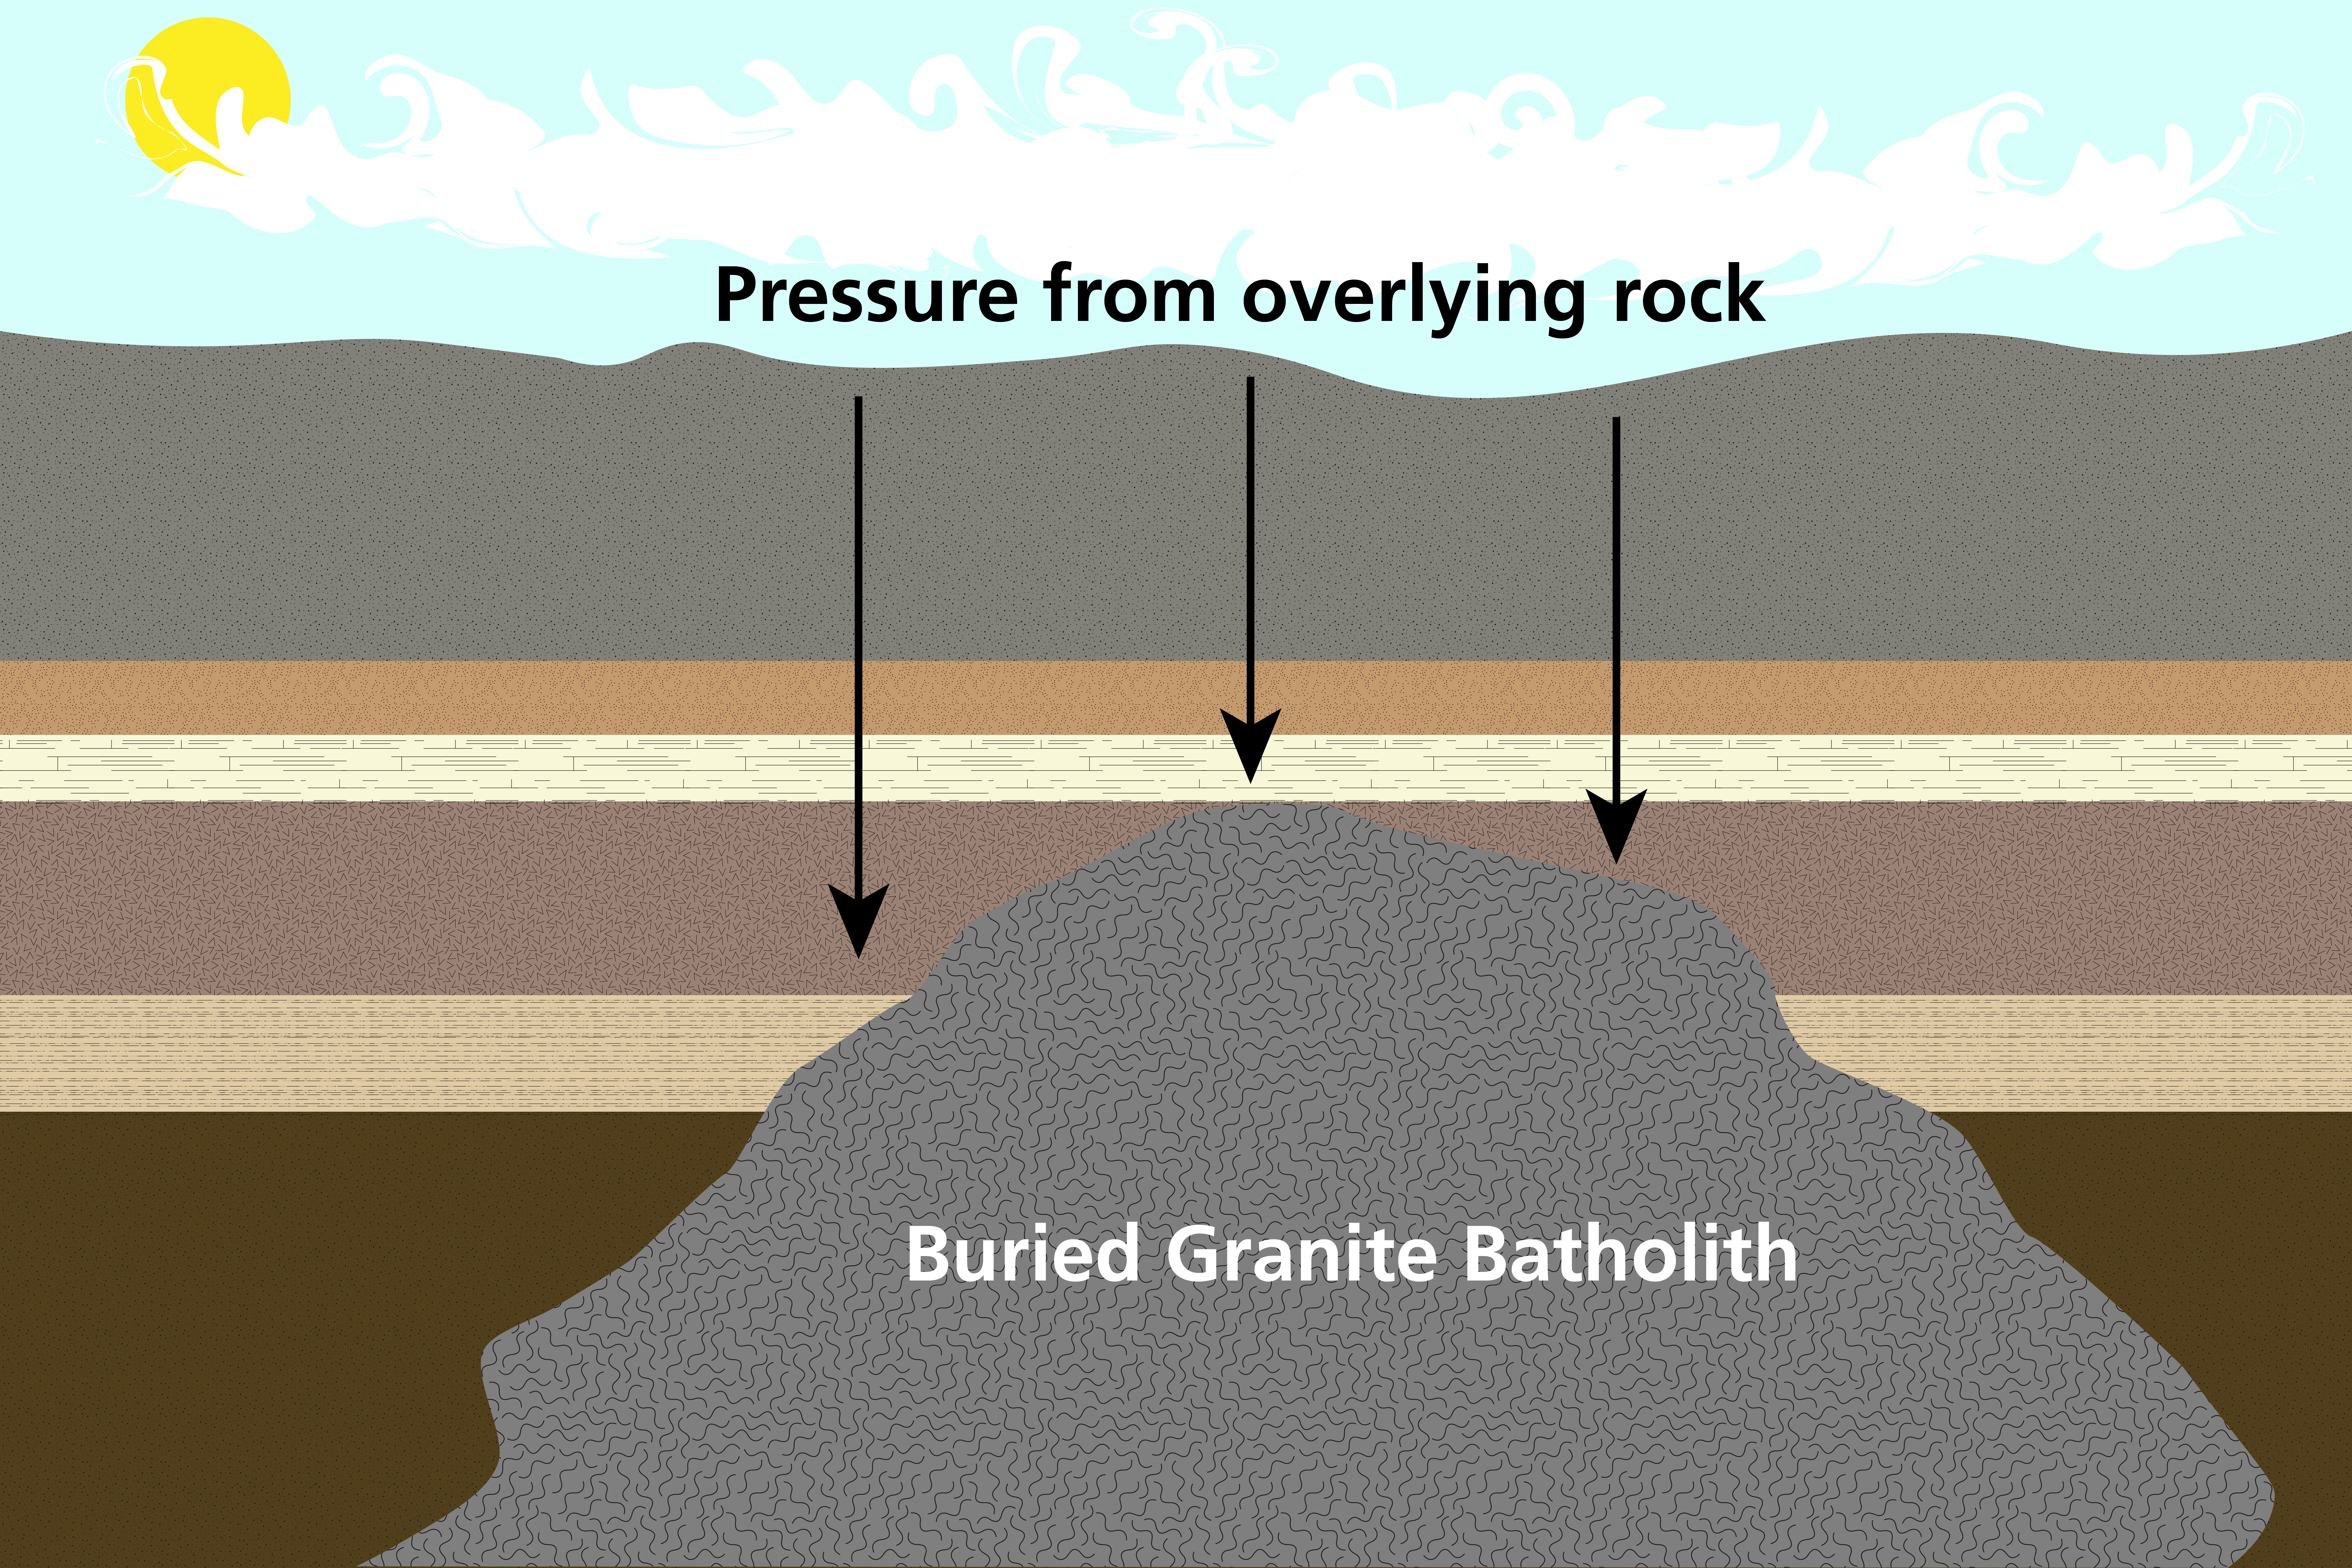 A schematic diagram showing a subsurface igneous rock body.